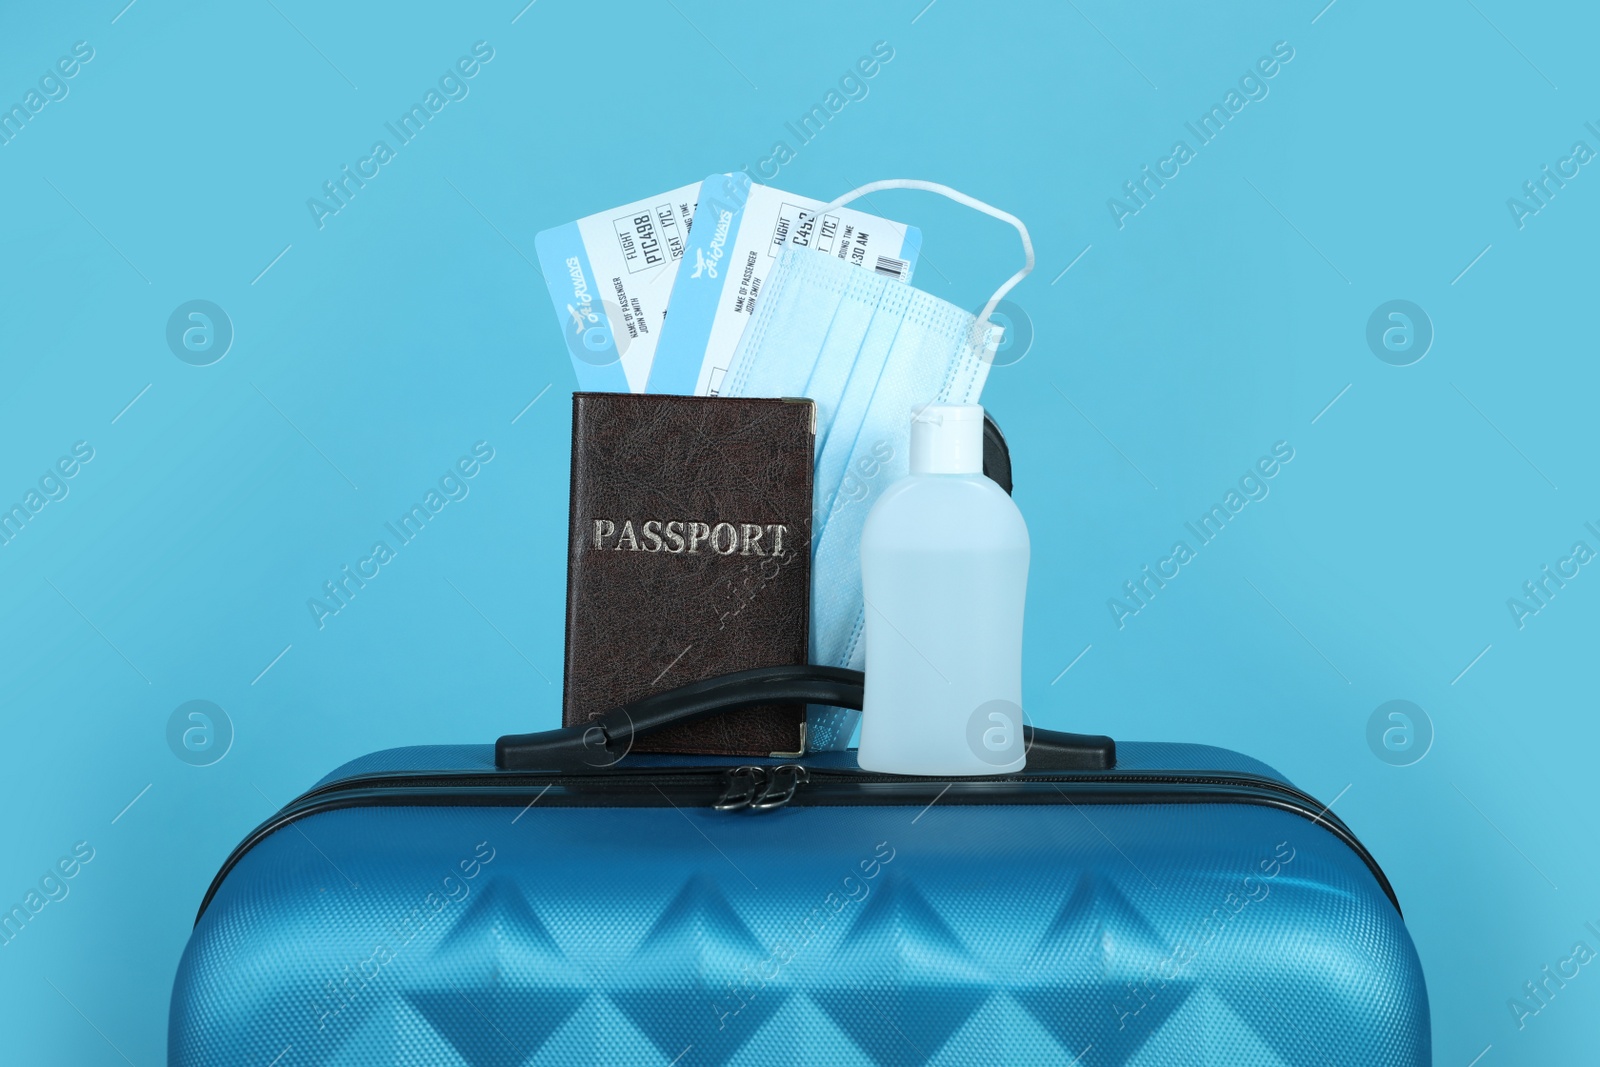 Photo of Passport with tickets, sanitizer and protective mask on suitcase against light blue background. Travel during quarantine